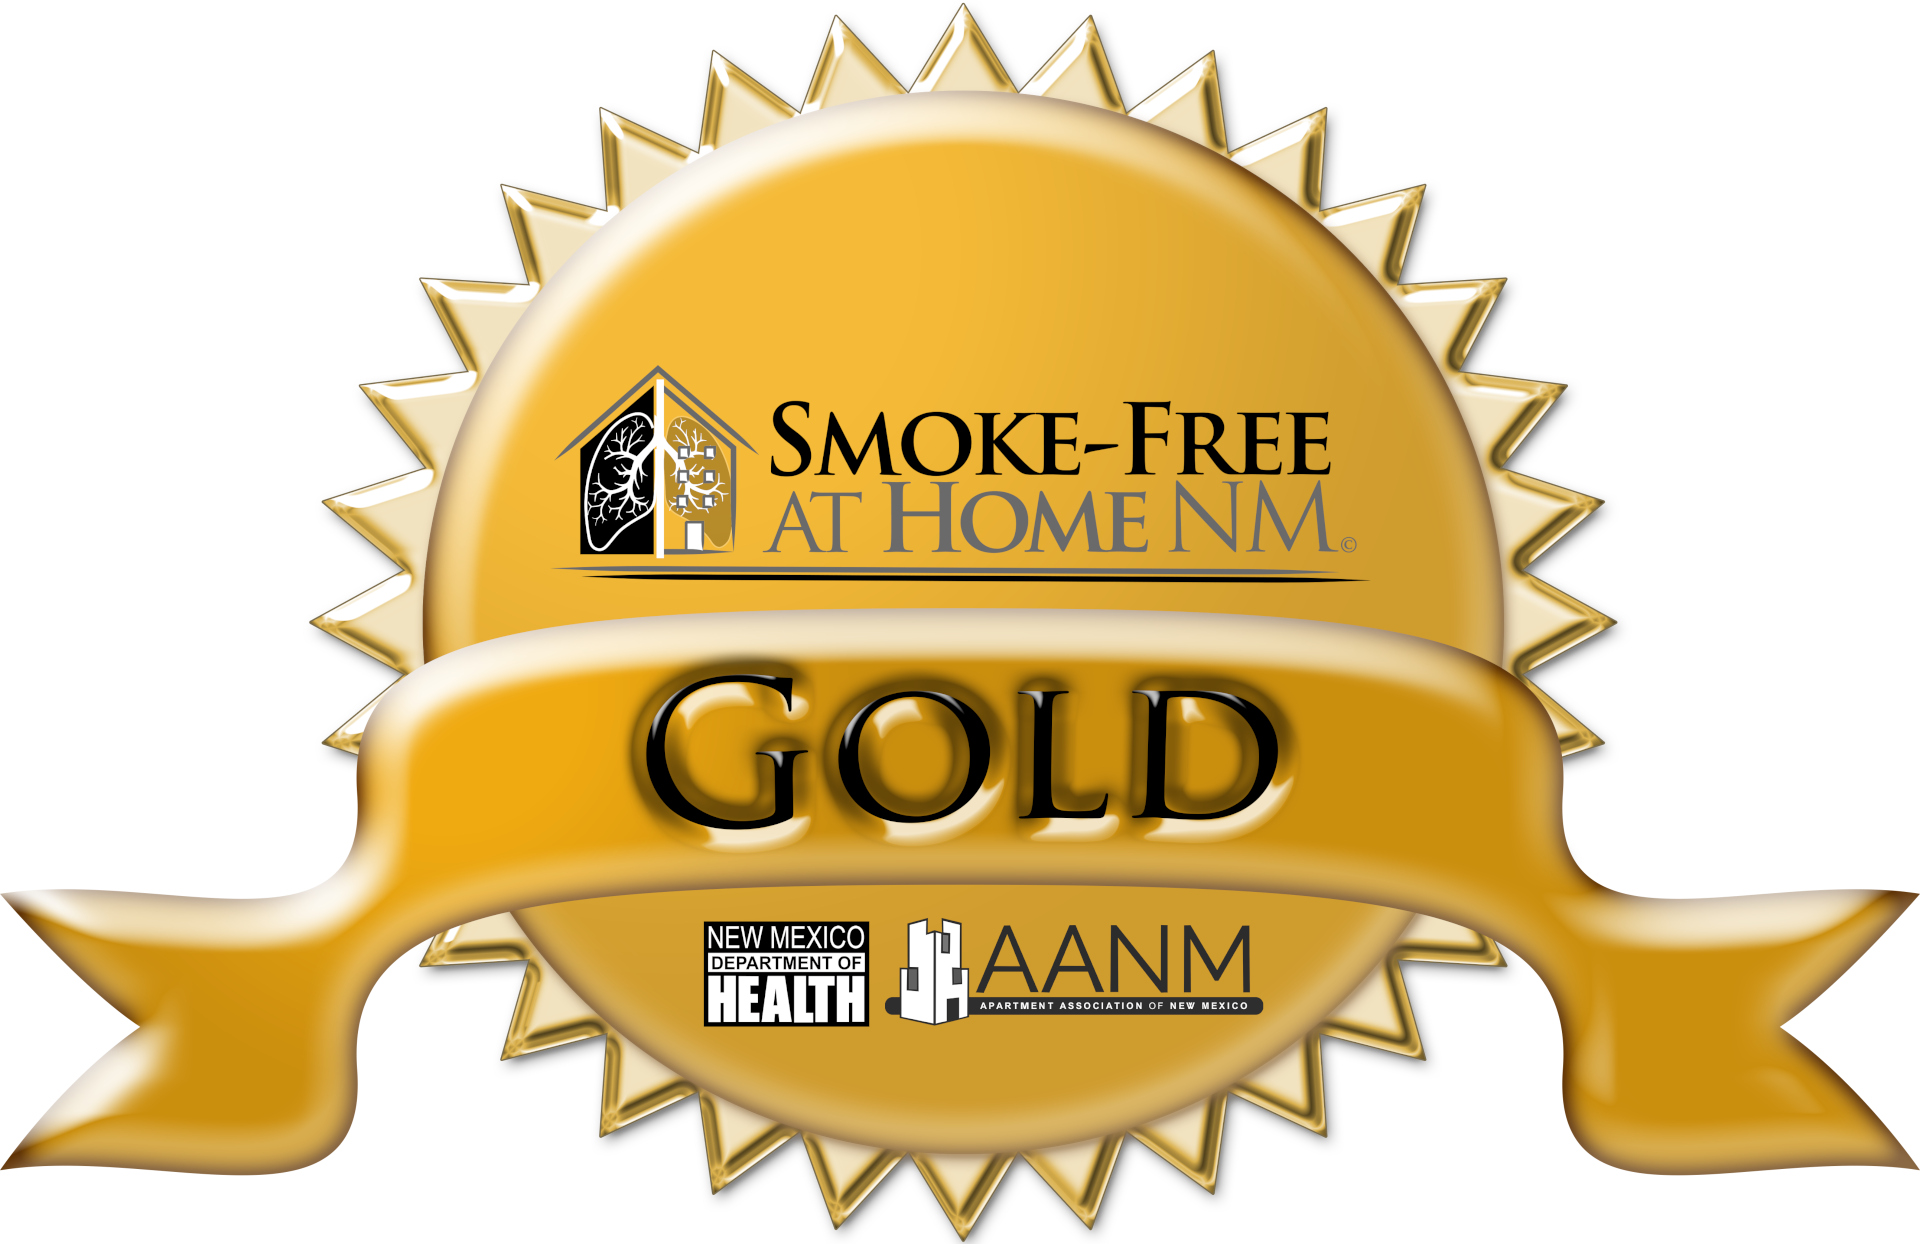 Gold: An Existing Property that does not allow any smoking, including electronic cigarettes, on any part of the property at any time.